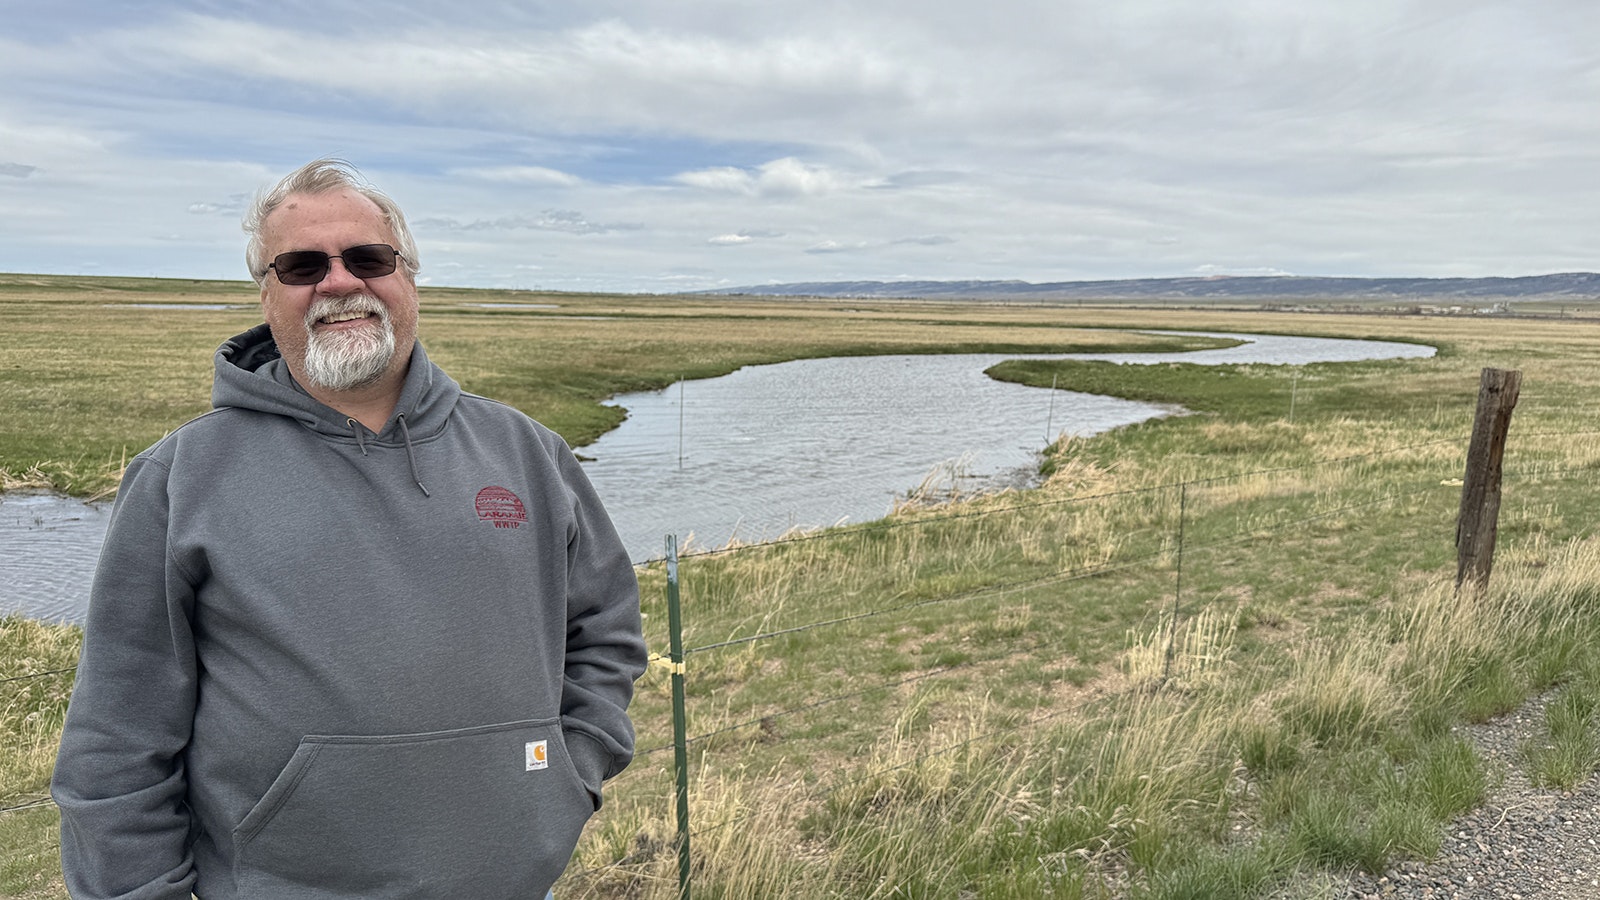 Bill Schott, supervisor of the wastewater treatment plant for the Laramie Public Works Department, stands along a 2-mile stream of nonpotable water treated at the plant, with the effluent eventually making its way to the Laramie River.